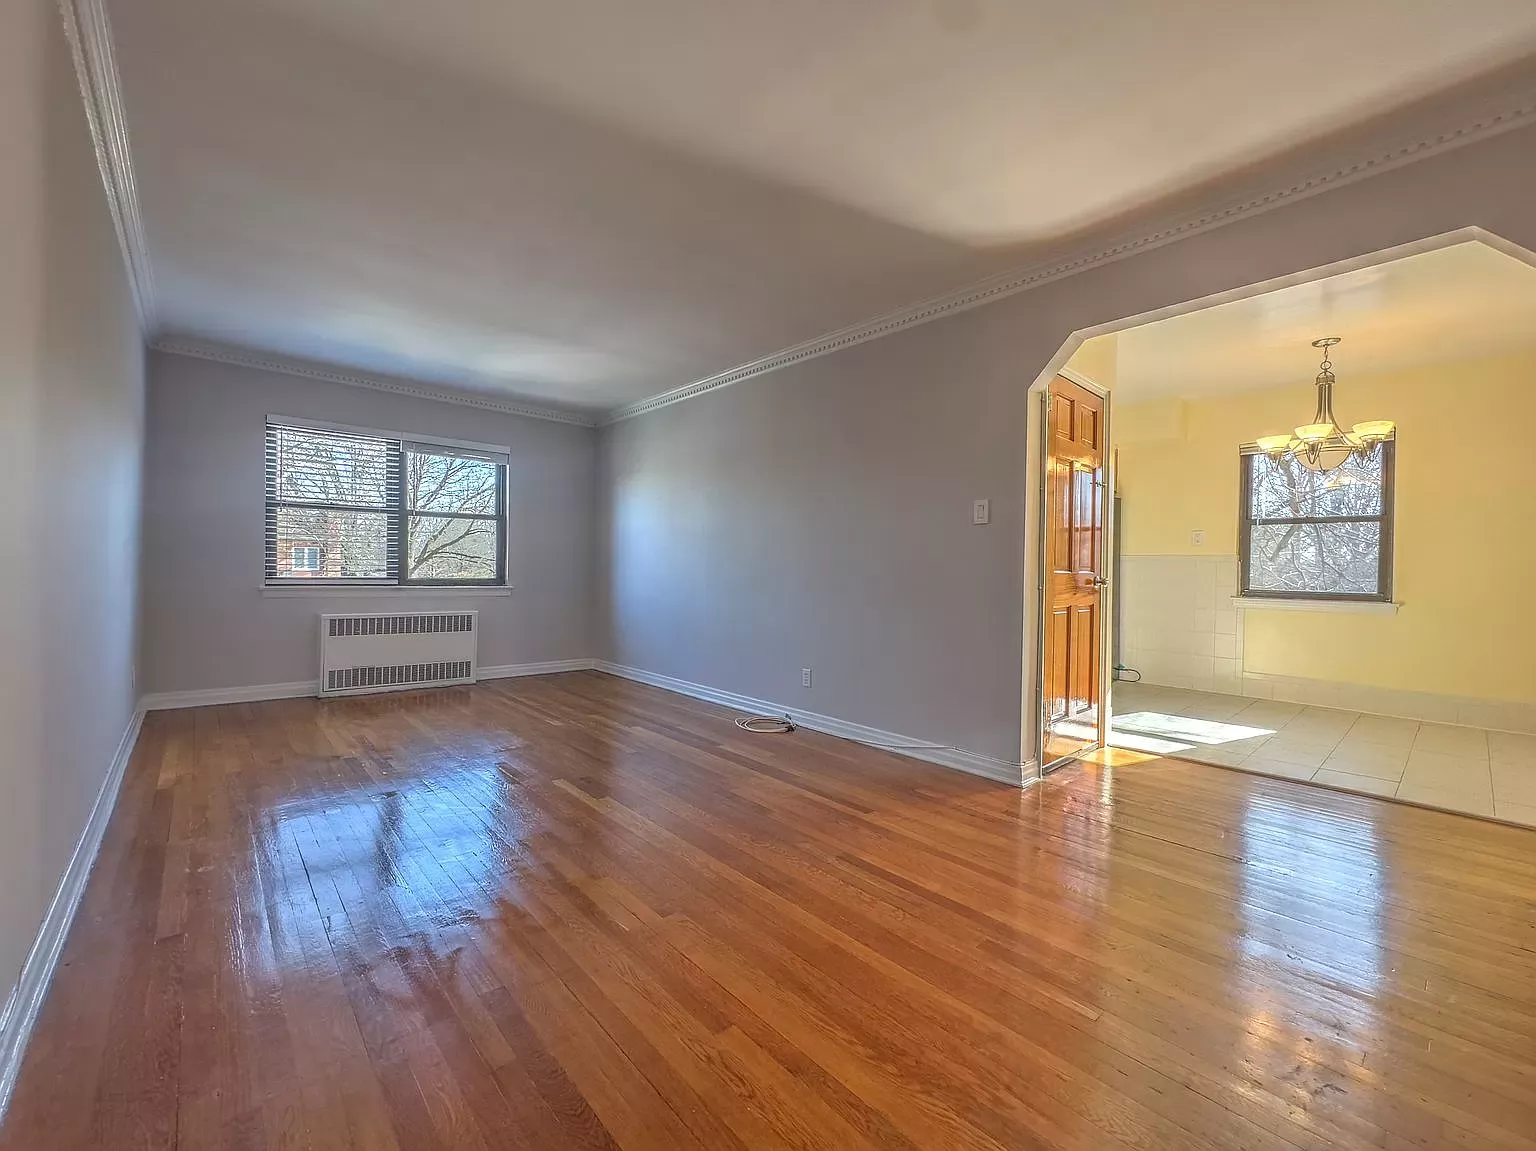 Apartment for Rent in Middle Villege, Queens NY